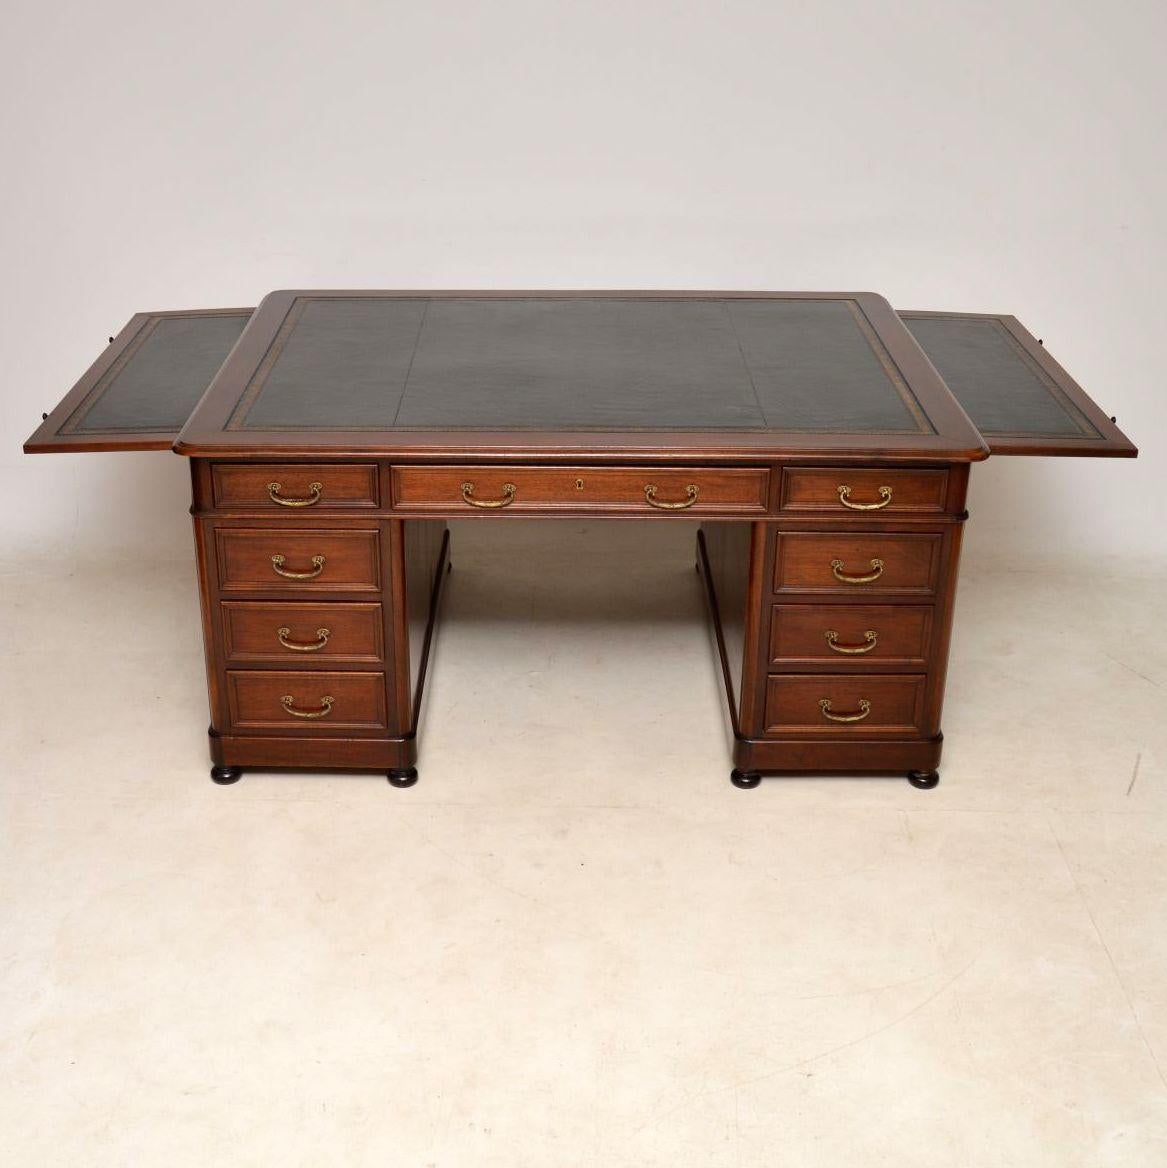 Fine quality antique mahogany partners desk with the original tooled leather writing surface and two pull-out slides also with the same tooled leather. It’s a great looking piece and a good sized desk with drawers on both back and front. The drawers